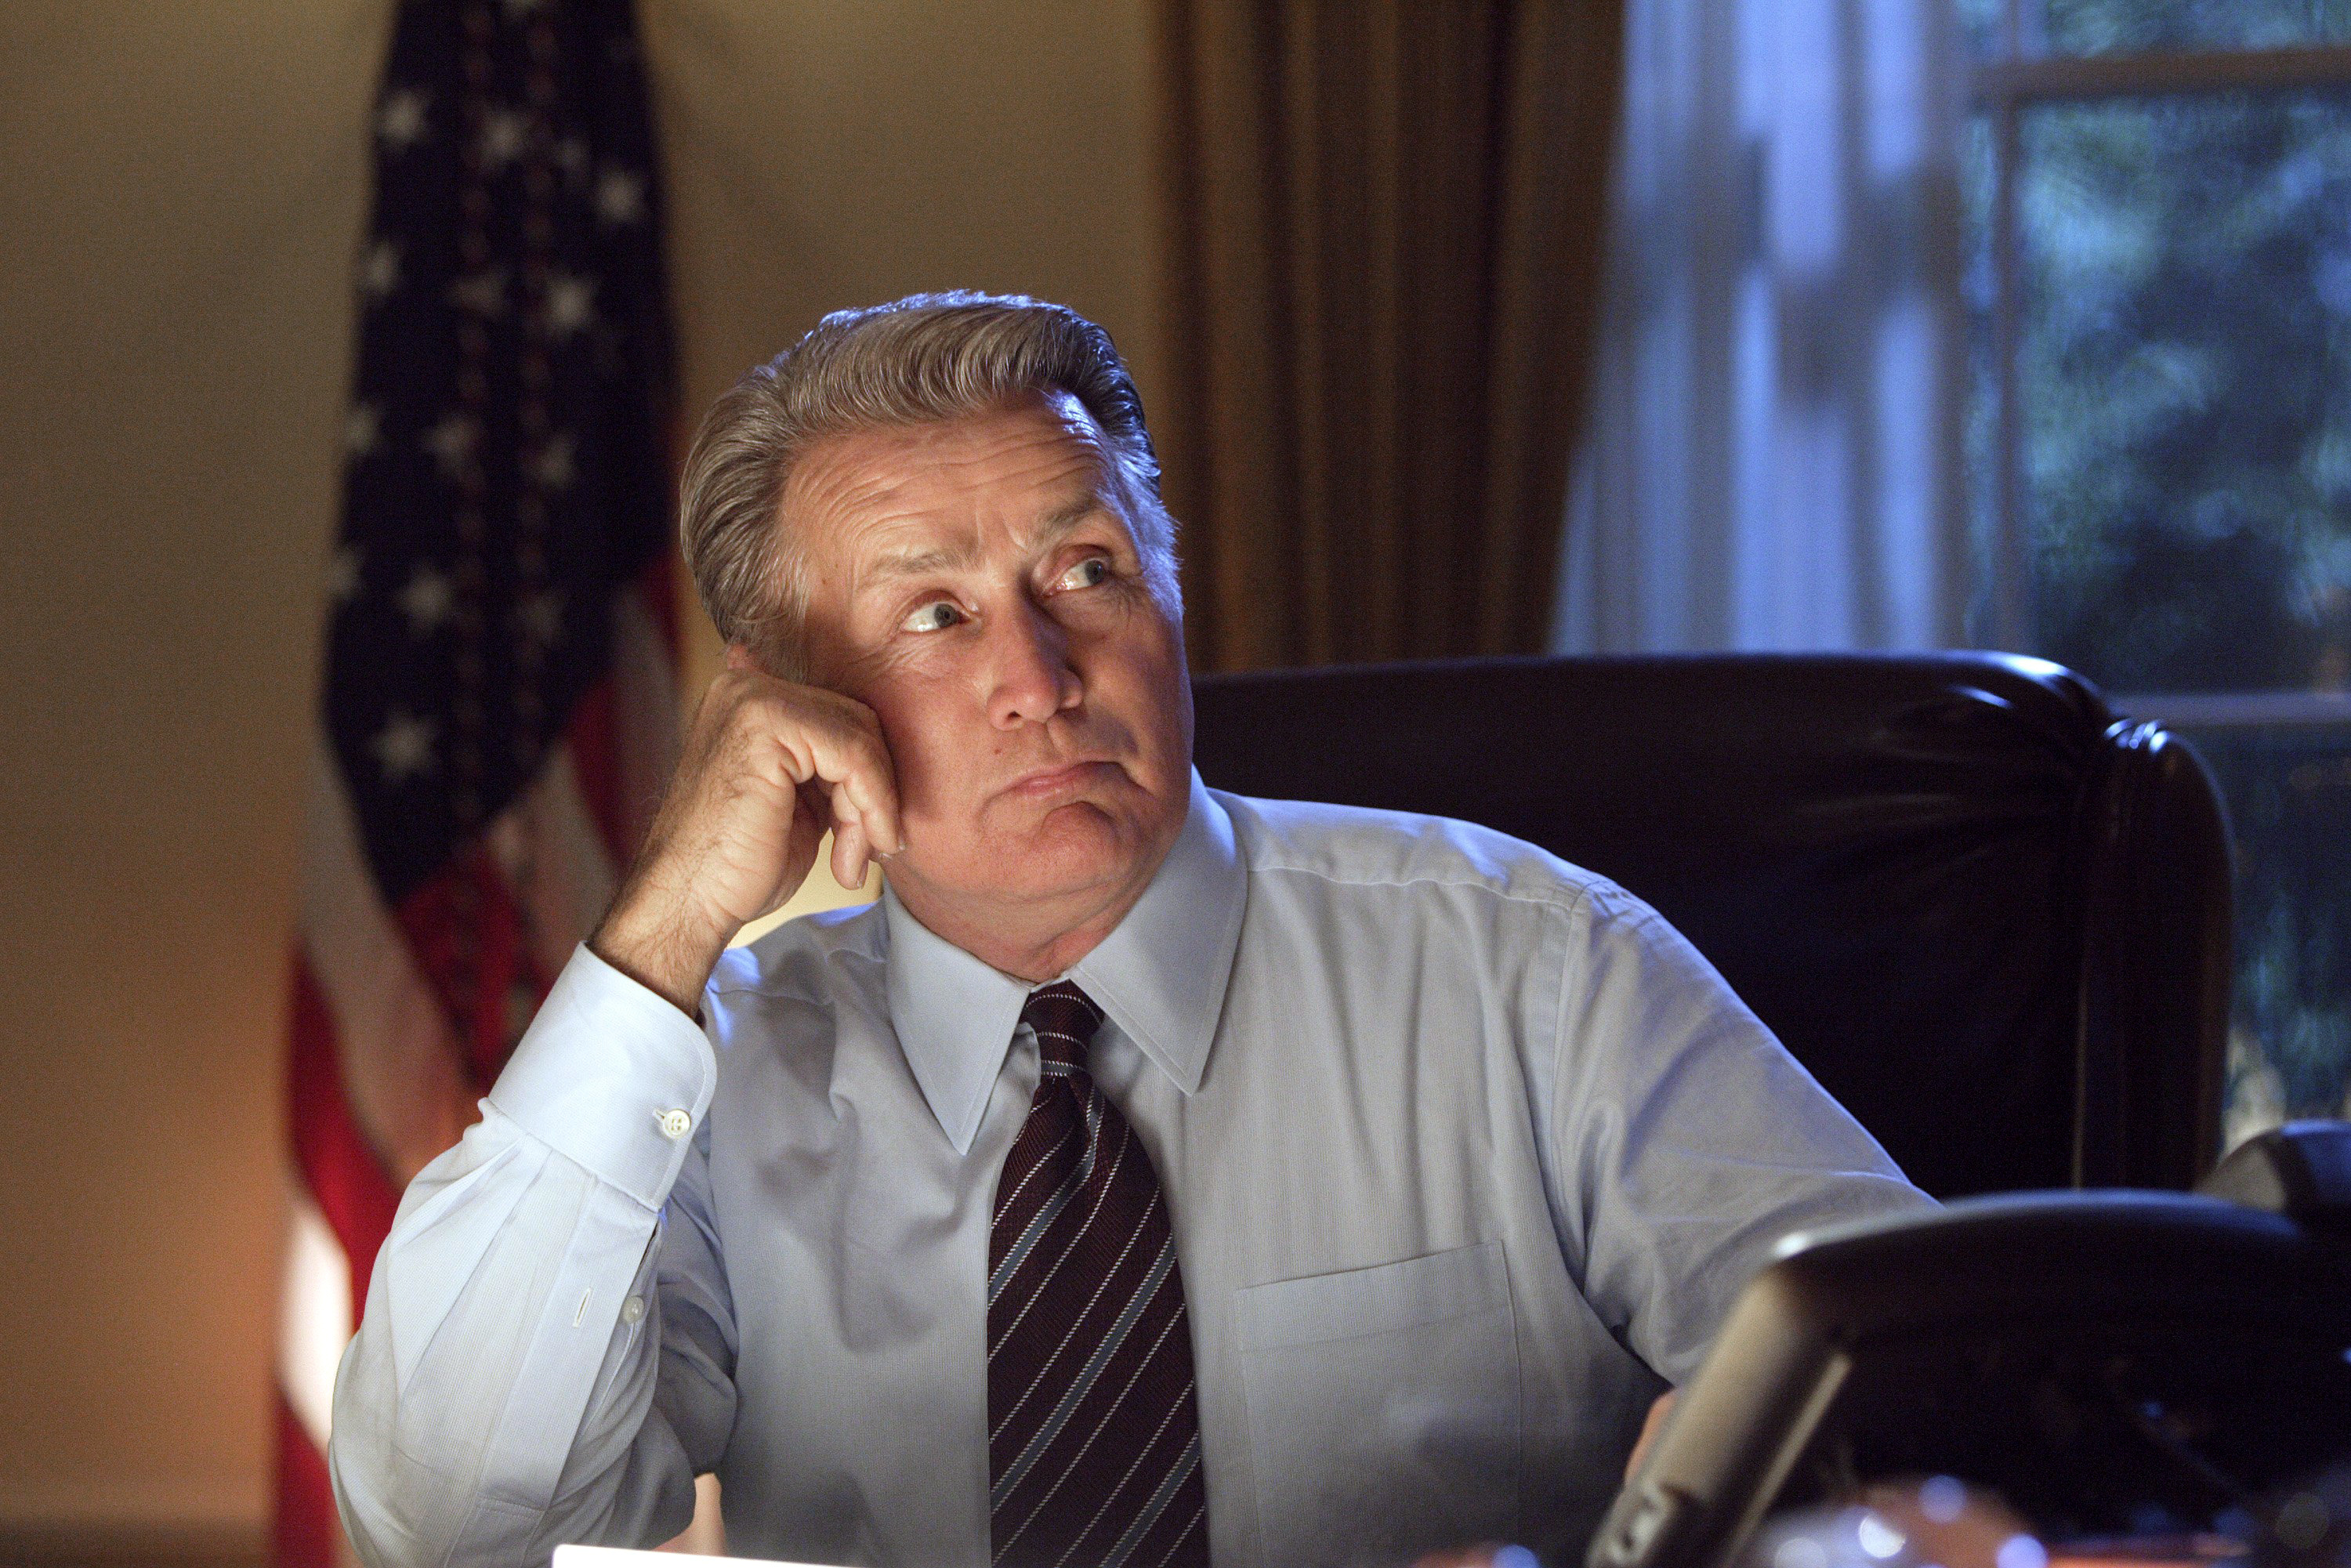 The West Wing (TV Series): Martin Sheen as Jed Bartlet, A fictional Democratic President of the United States. 3000x2010 HD Wallpaper.